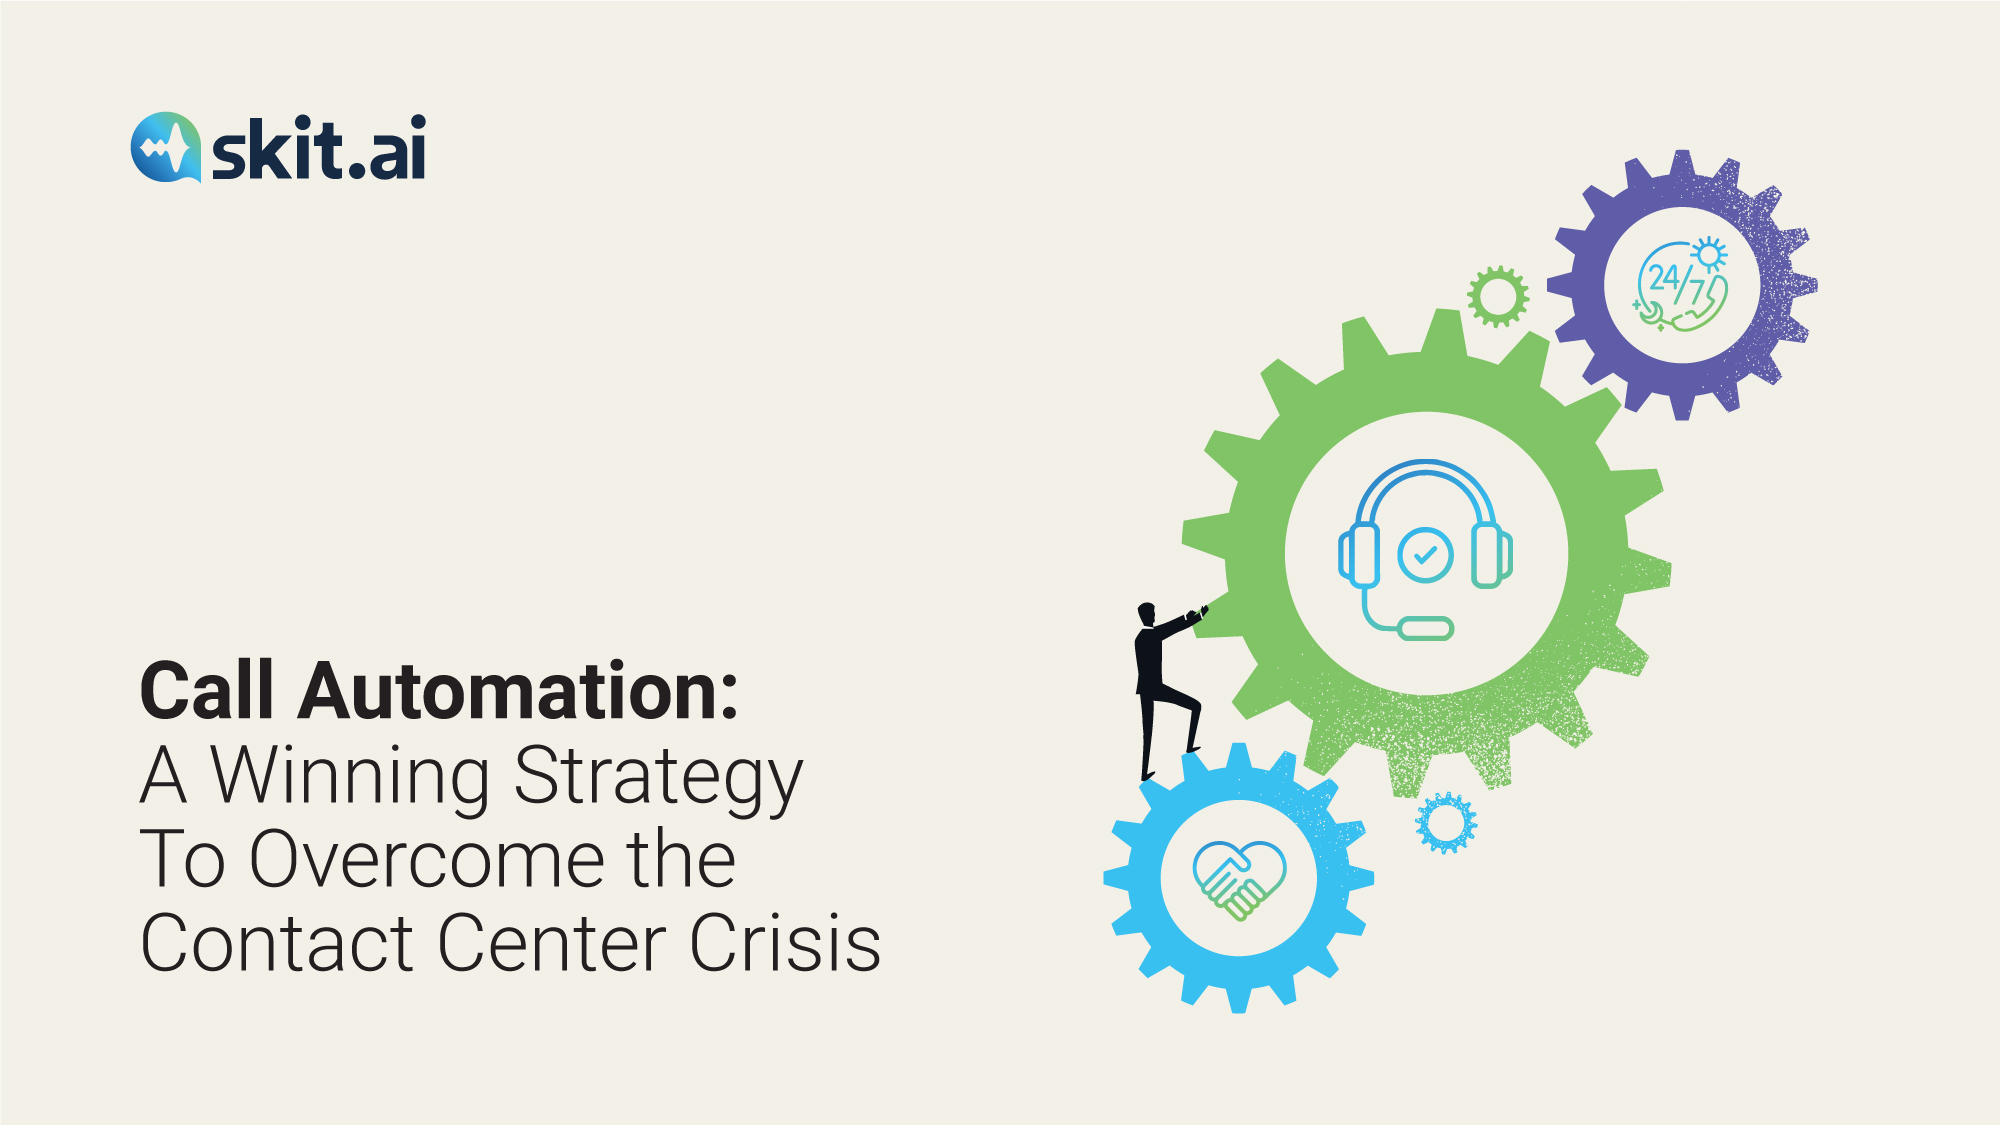 Contact Center Automation Trends: Don’t Overlook Call Automation